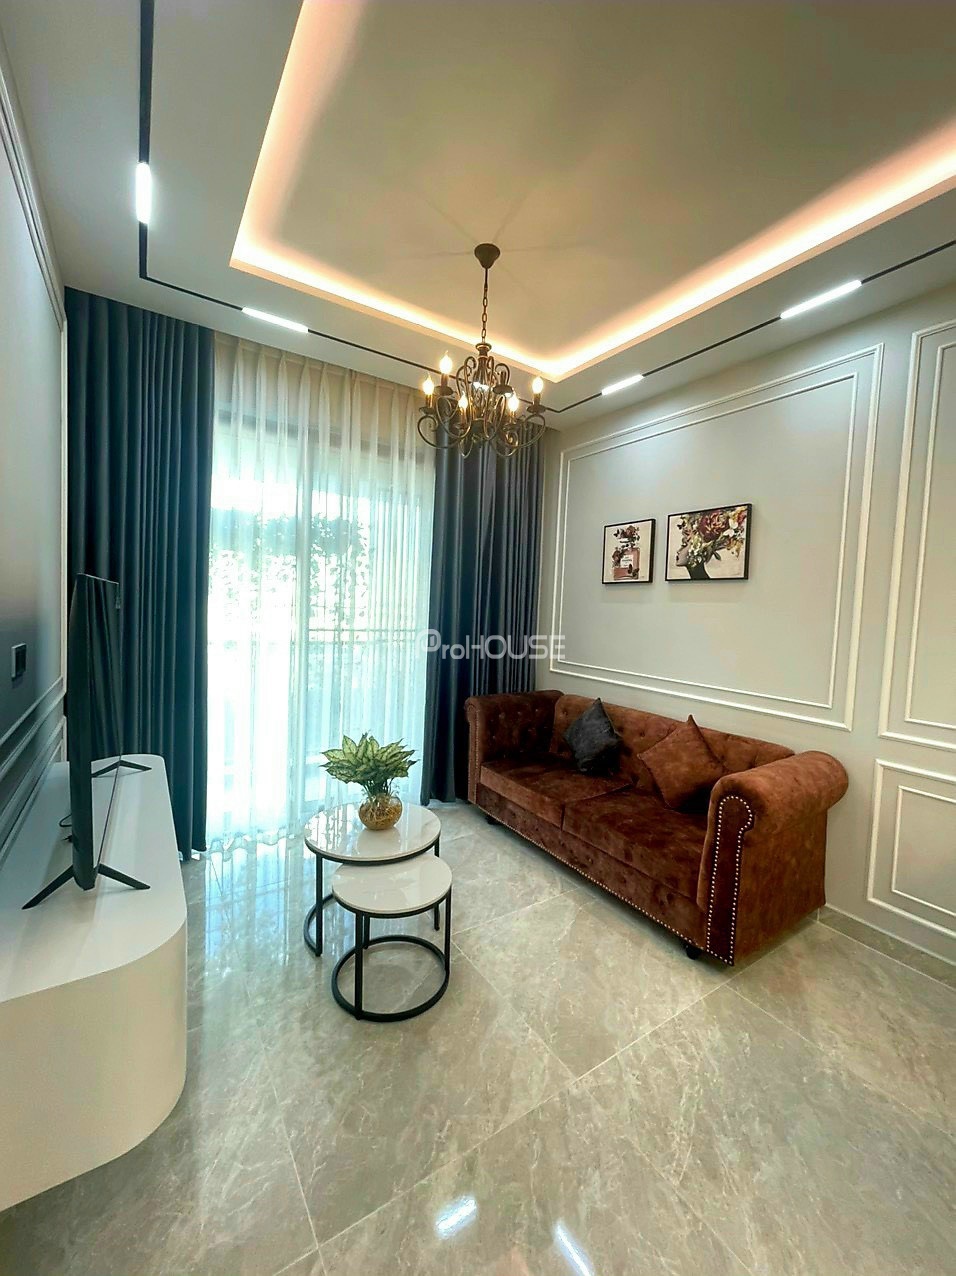 Luxury apartment for rent in Midtown-The Peak with 2 bedrooms fully furnished